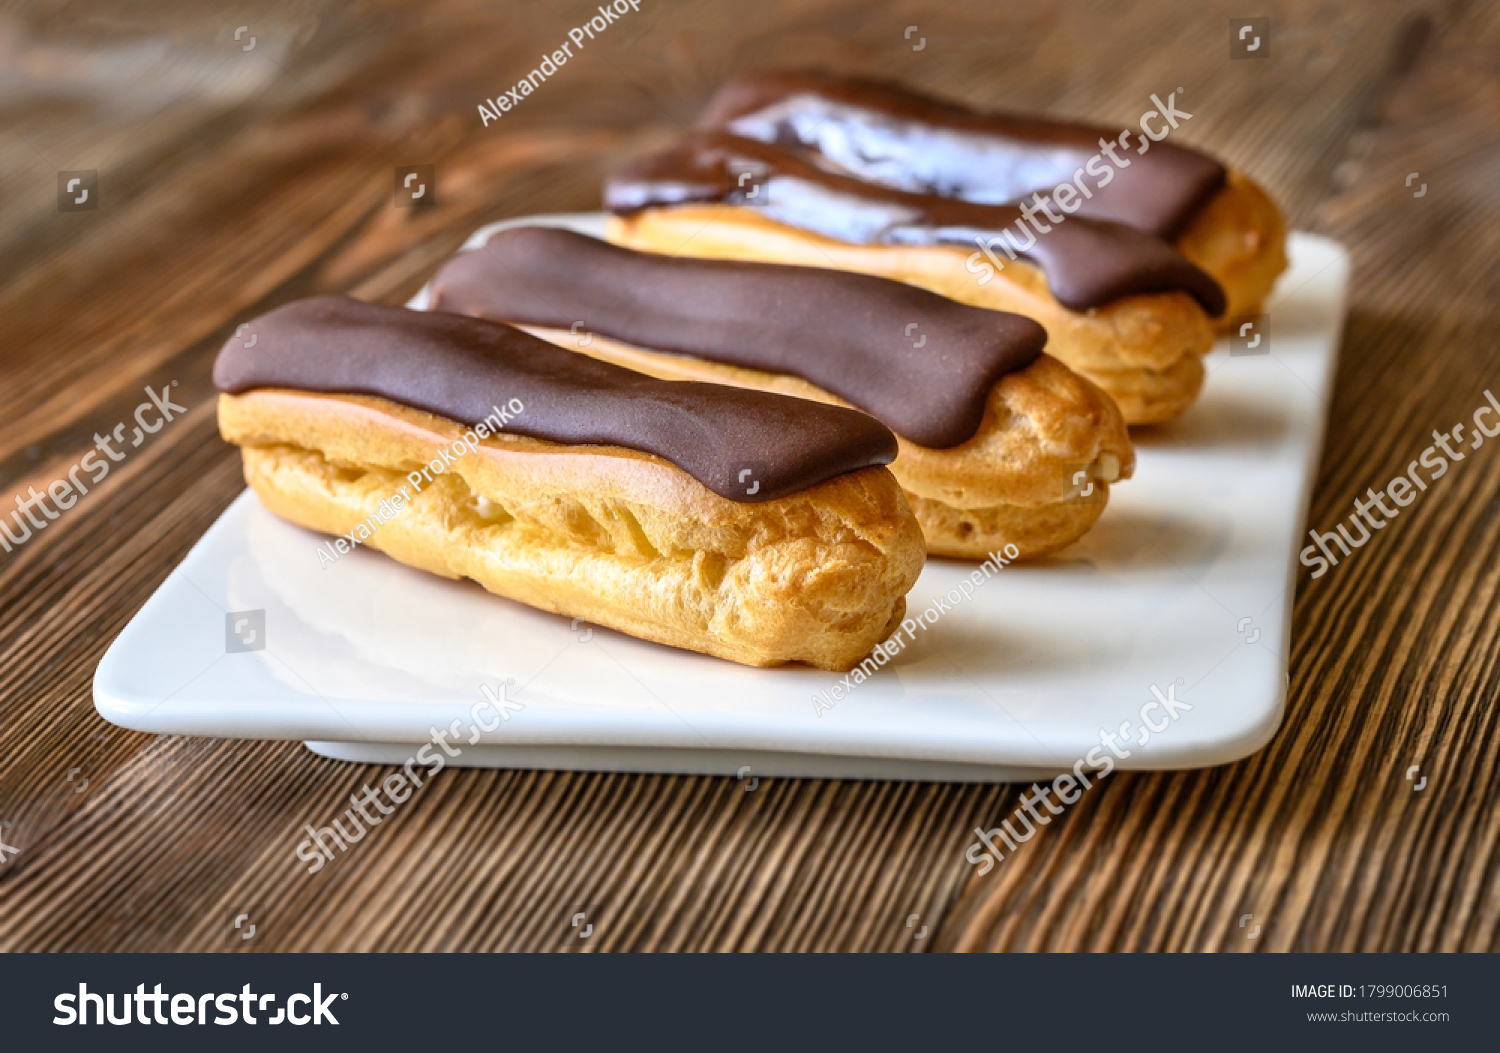 Eclairs with chocolate topping on serving plate #1799006851